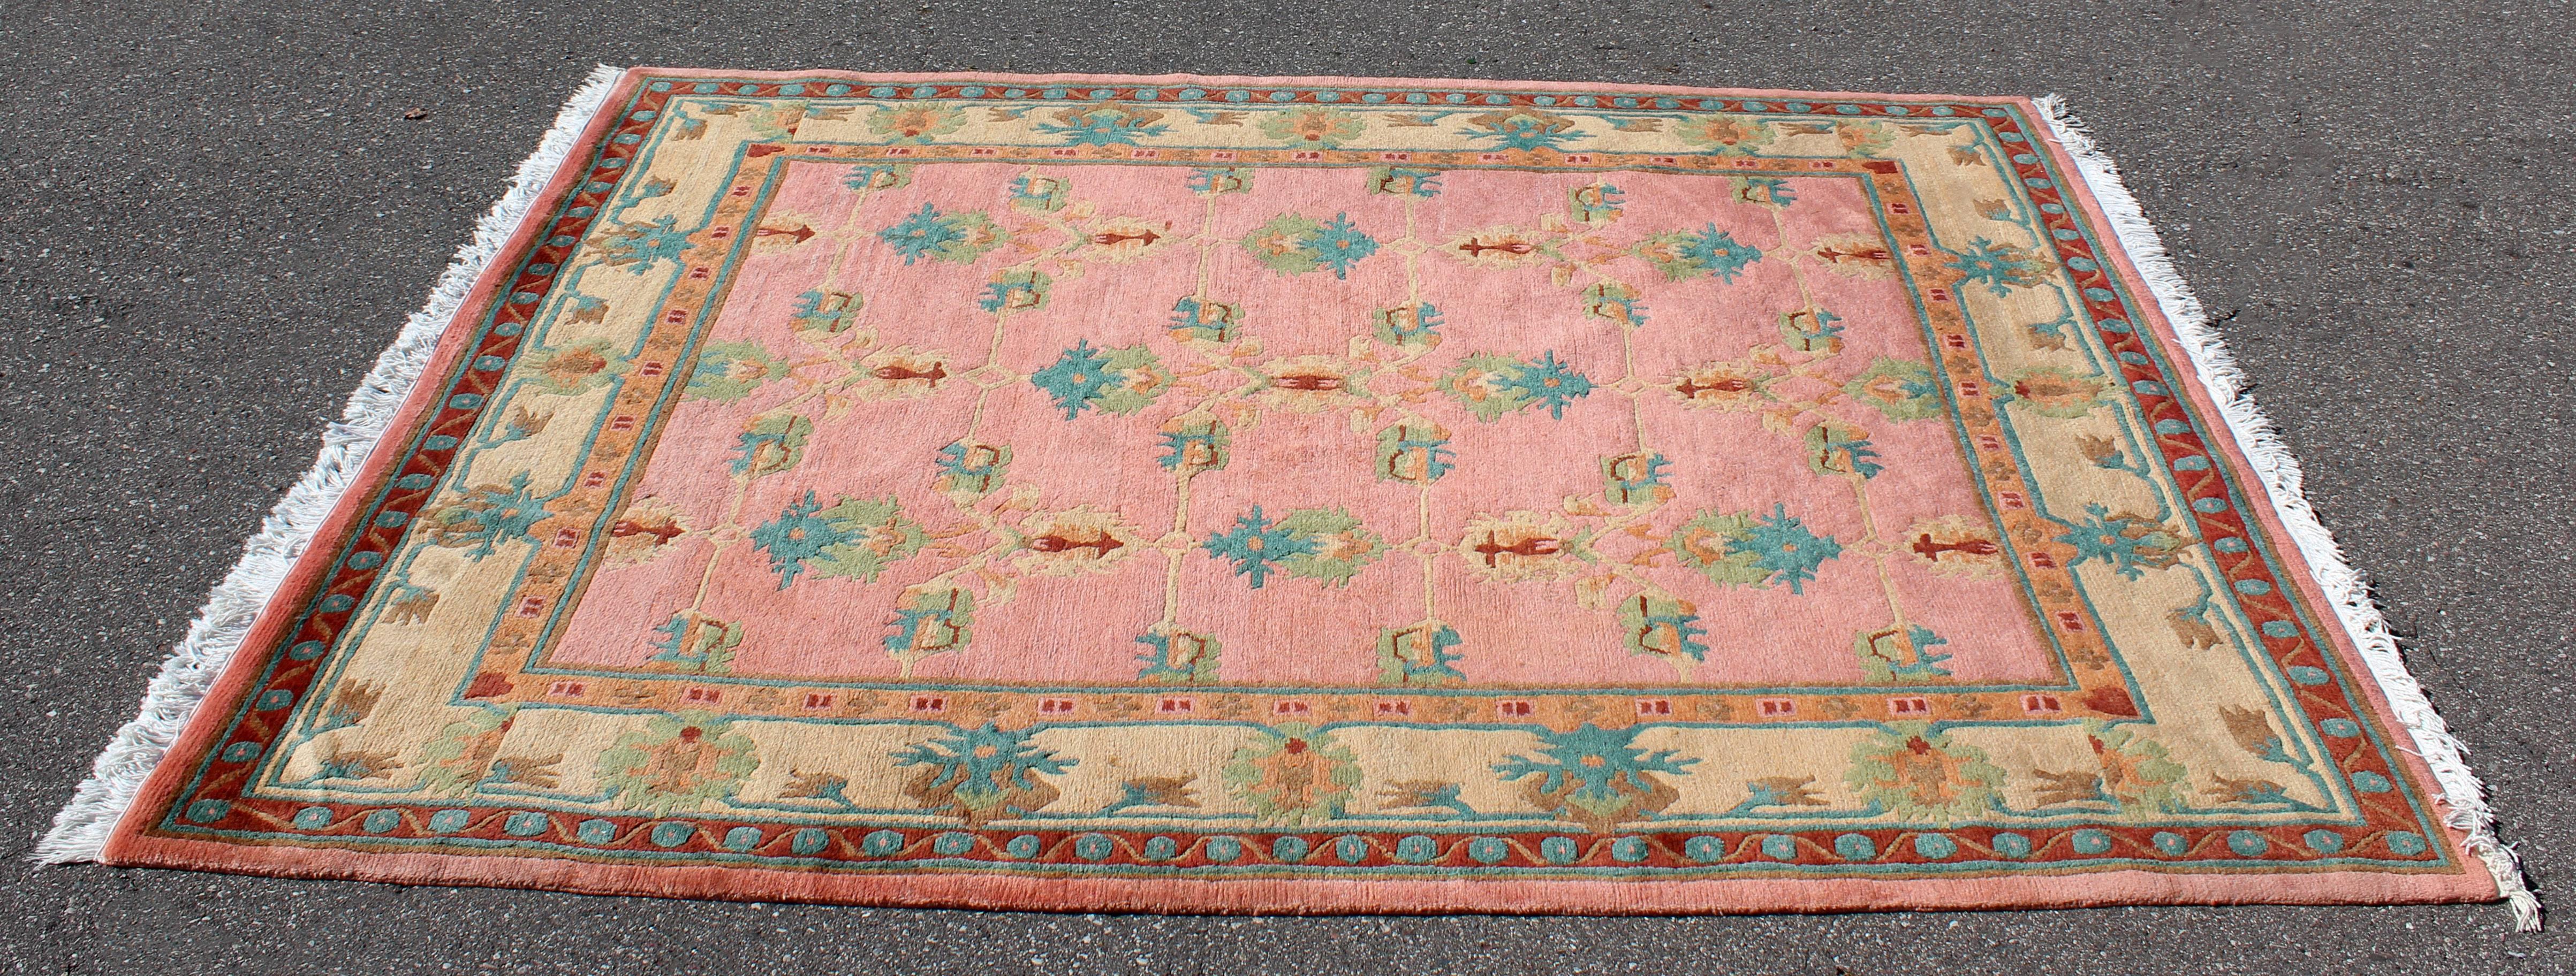 For your consideration is a massive Tufenkian hand-knotted, area rug or carpet from Nepal. In excellent condition. The dimensions are 122